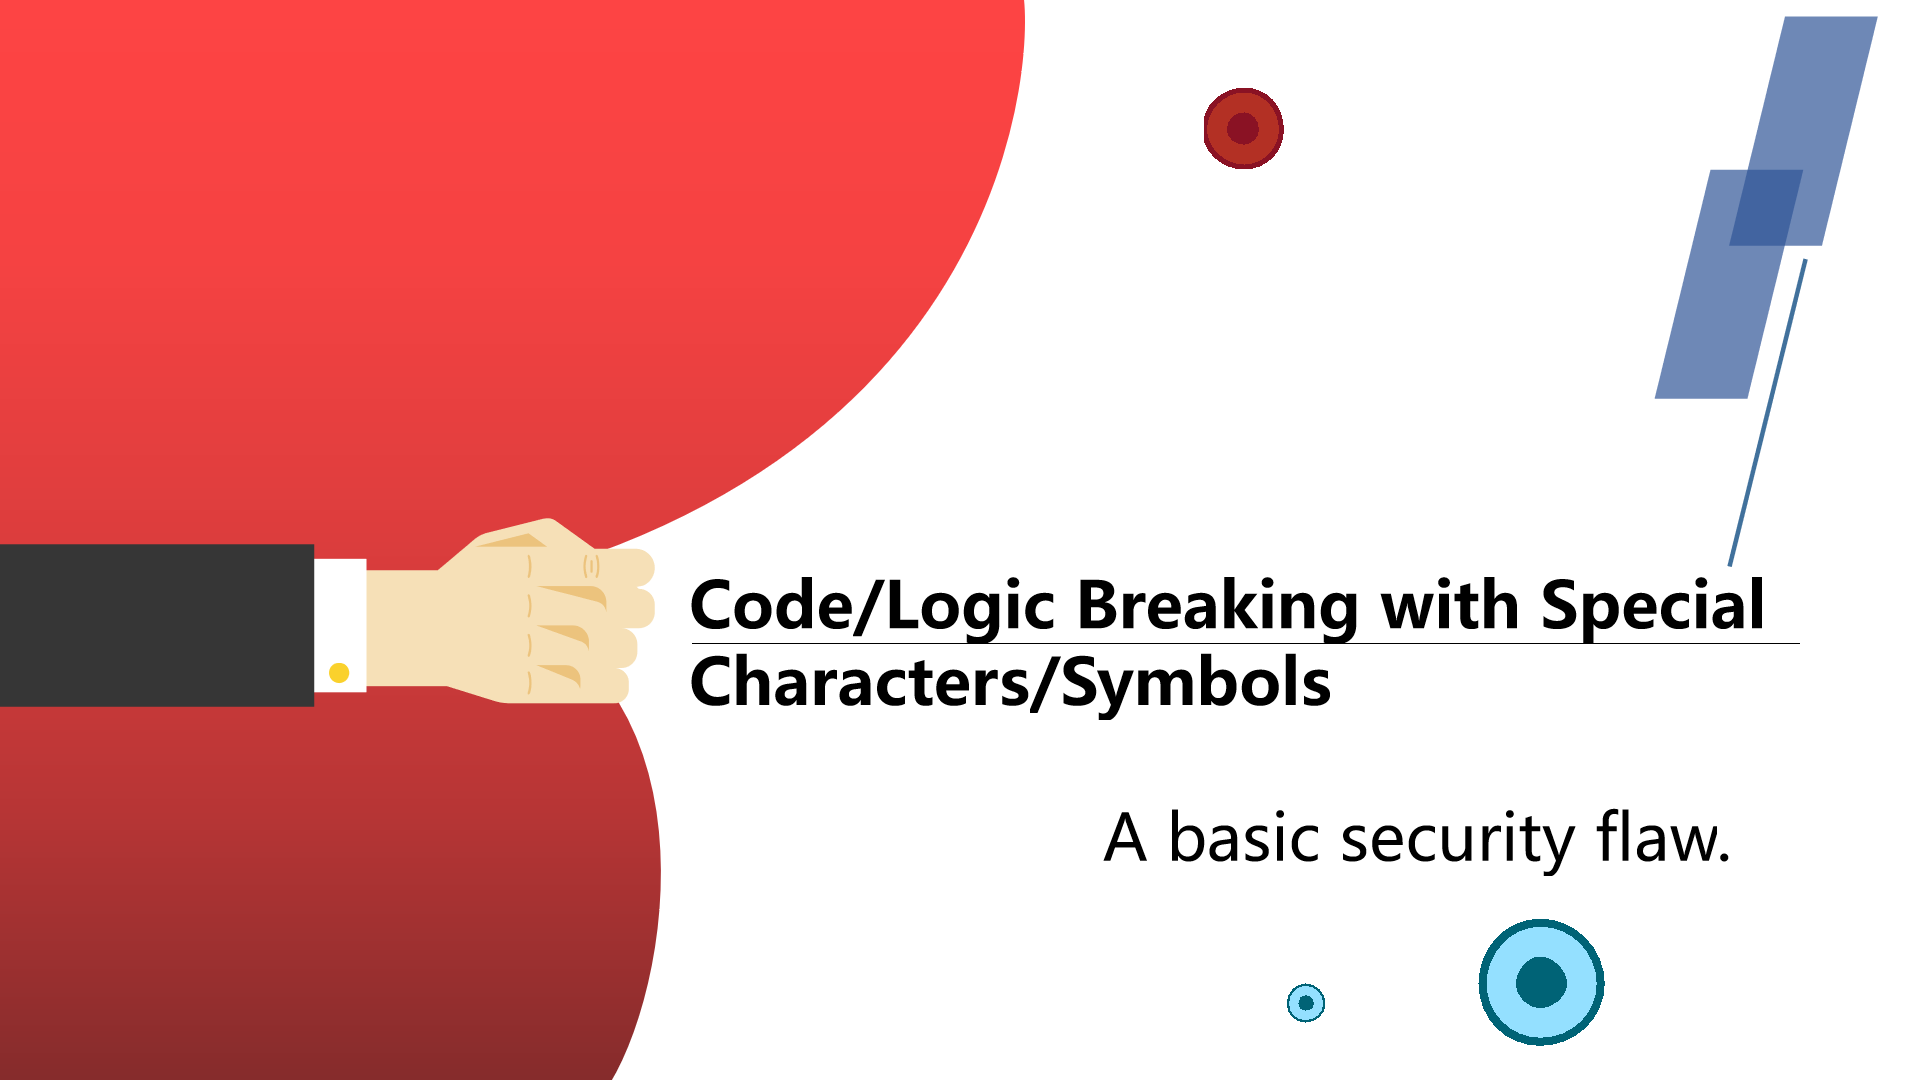 Code/Logic Breaking with Special Characters/Symbols.